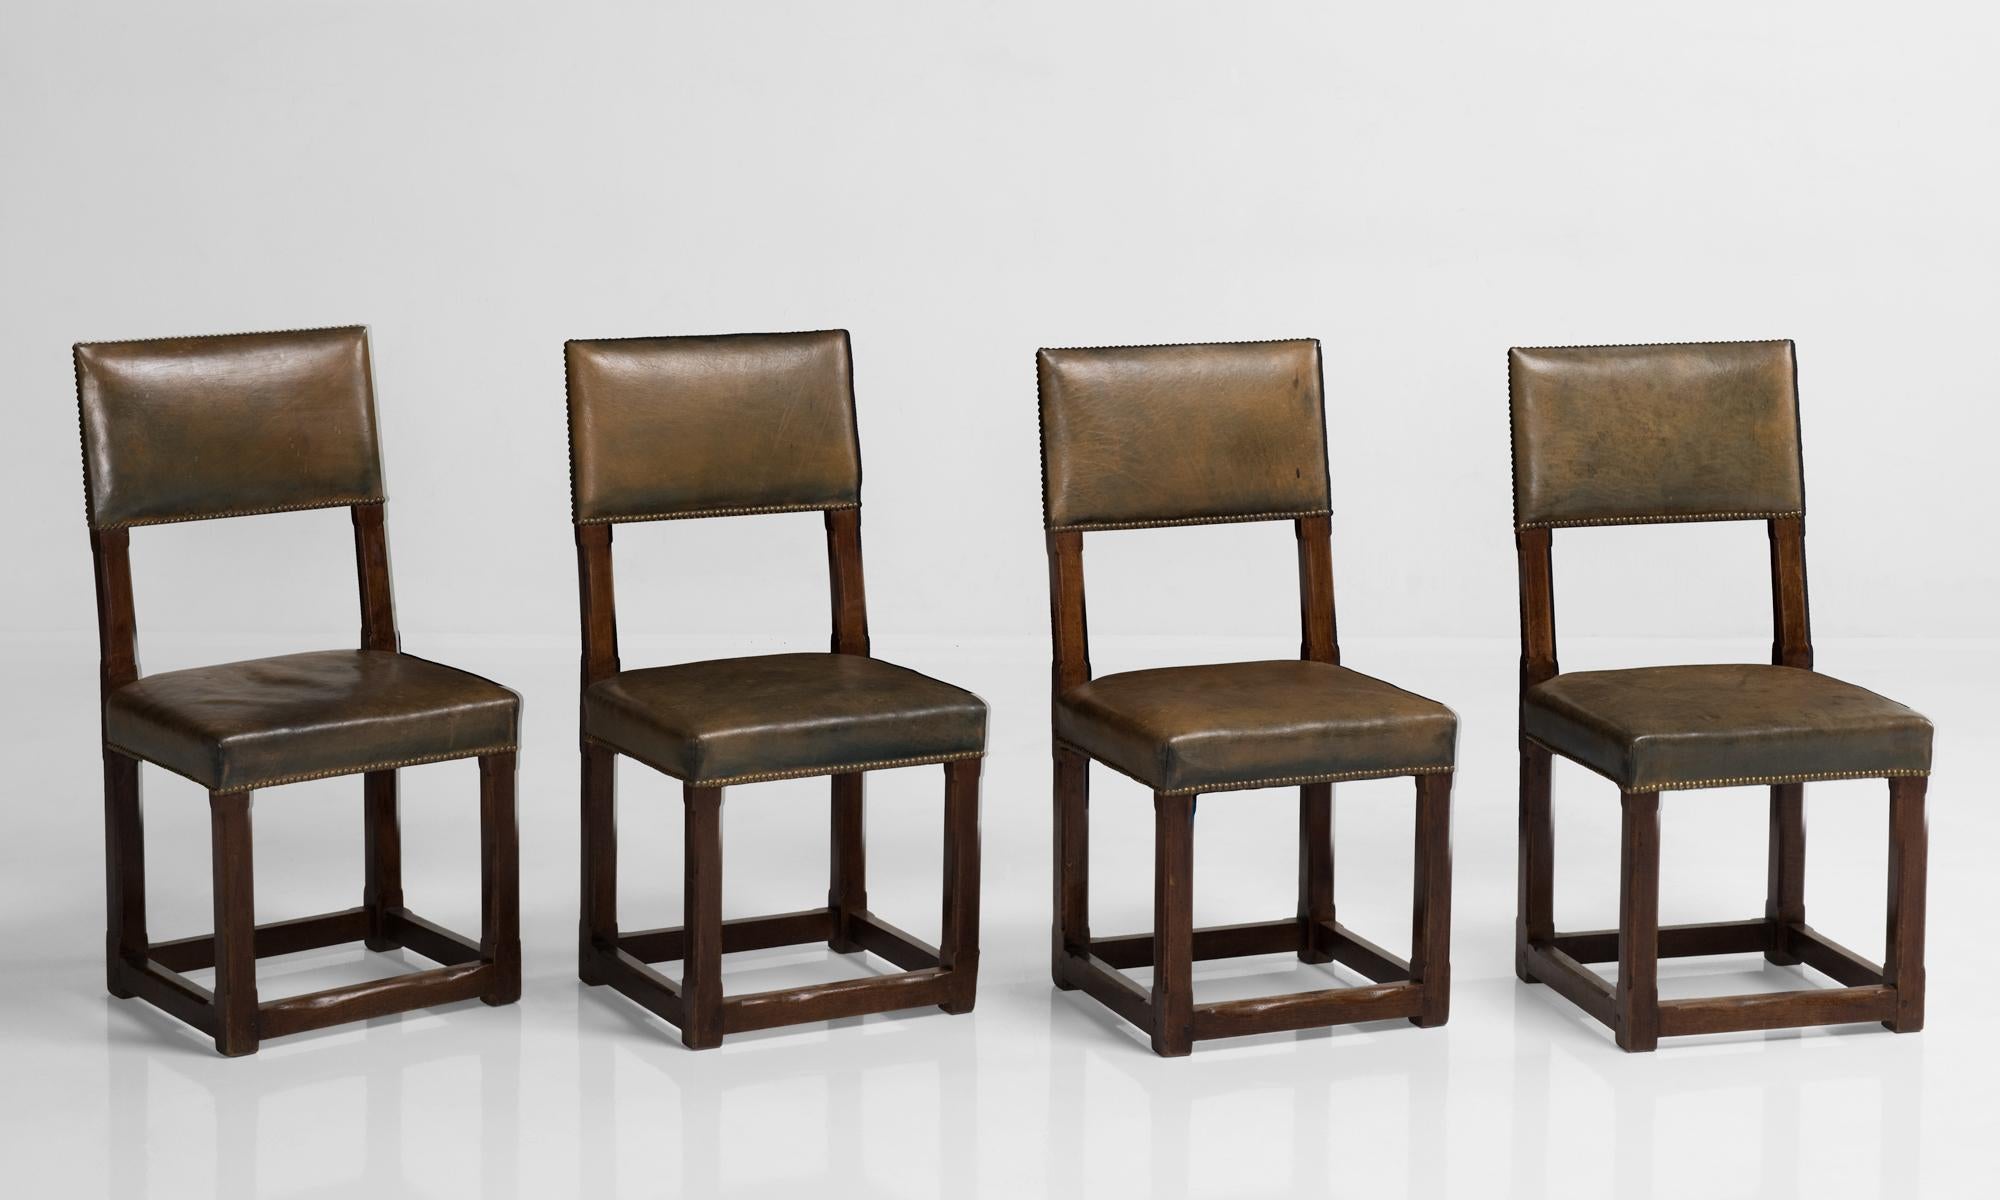 Set of twelve Gothic oak and leather dining chairs, England circa 1880.

Oak frame with leather seat and back. Designed in the manner of Pugin, and originally used in the House of Commons.